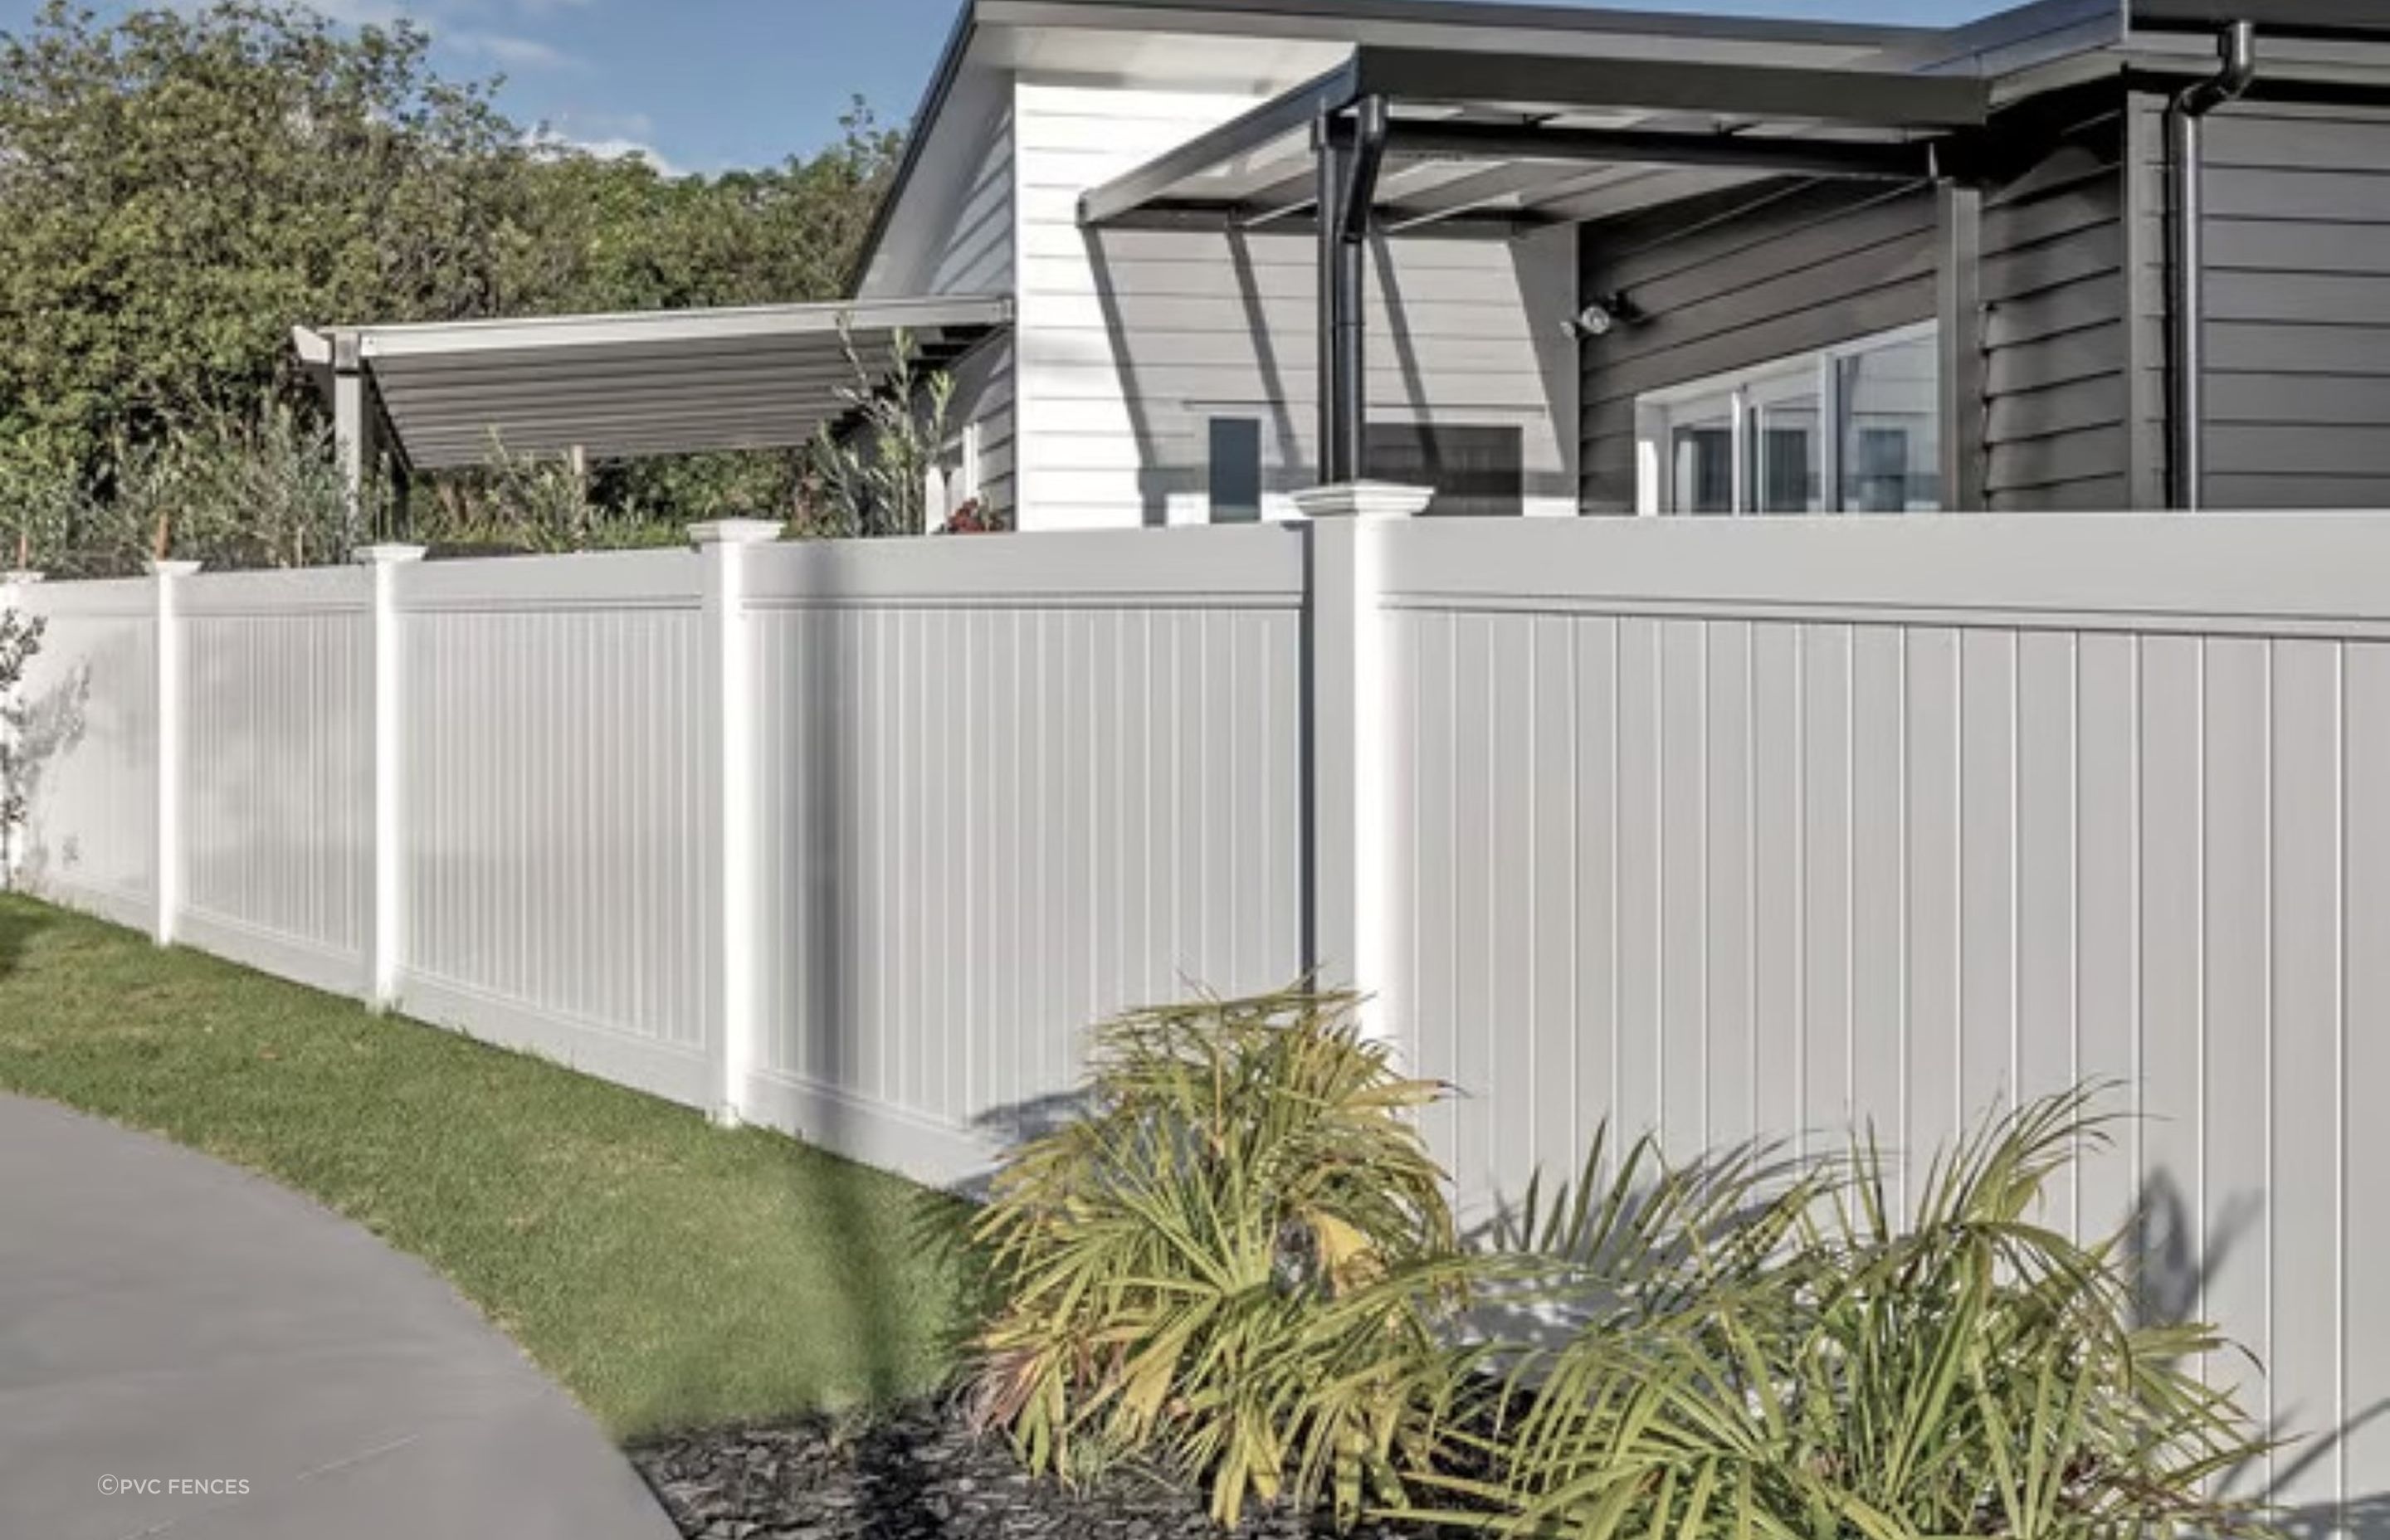 High-quality vinyl fencing offer great aesthetics and are virtually maintenance-free.